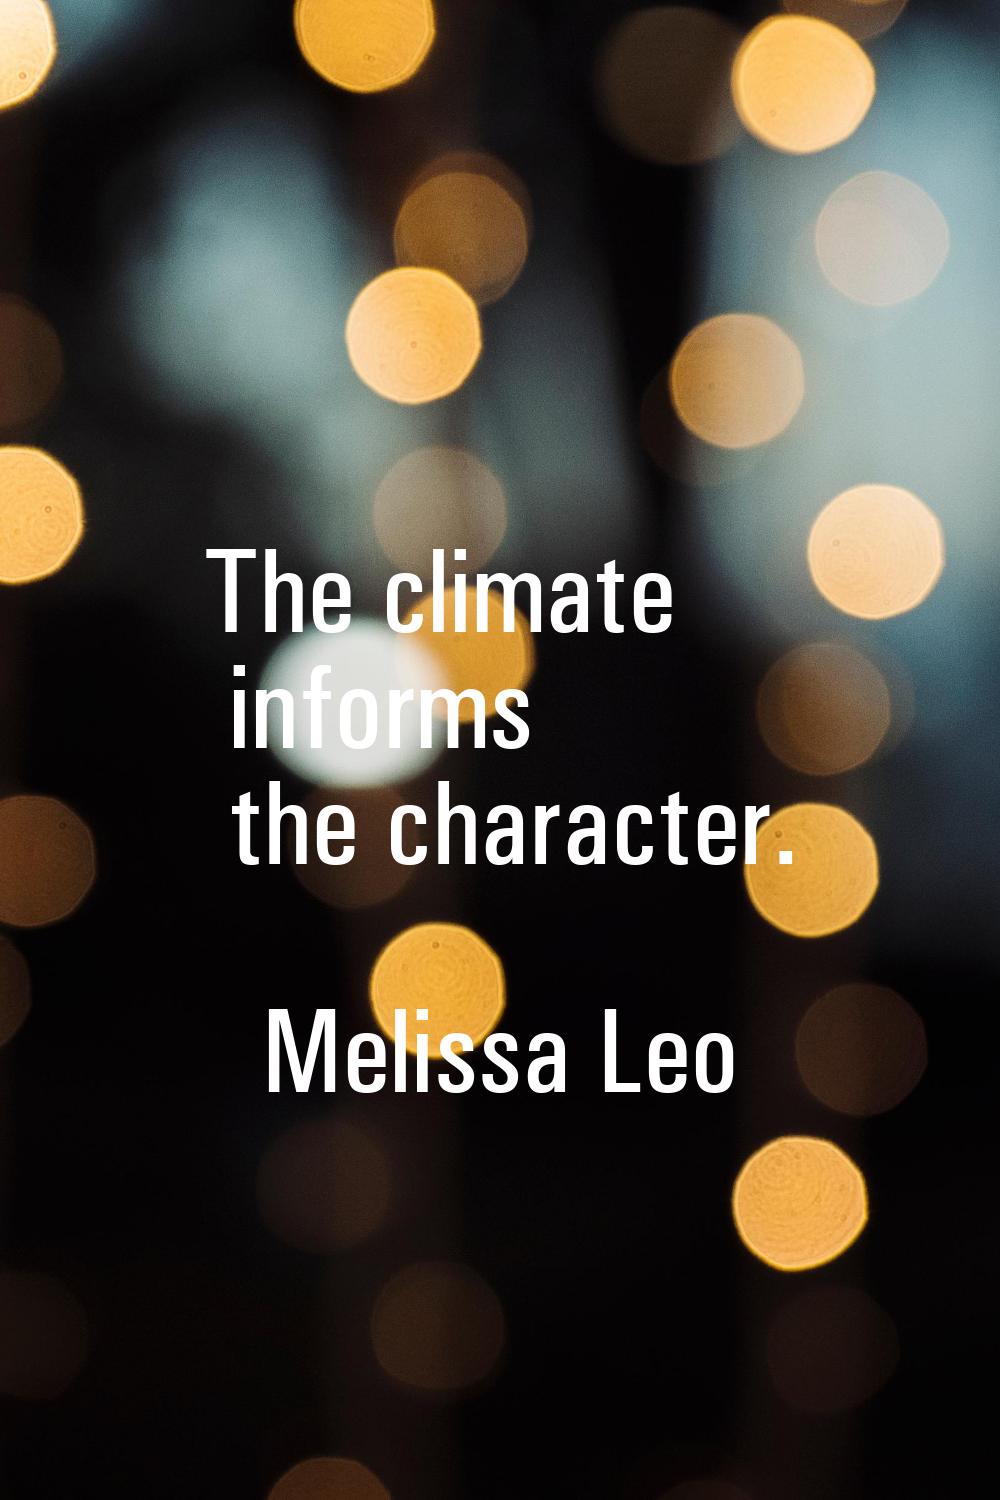 The climate informs the character.